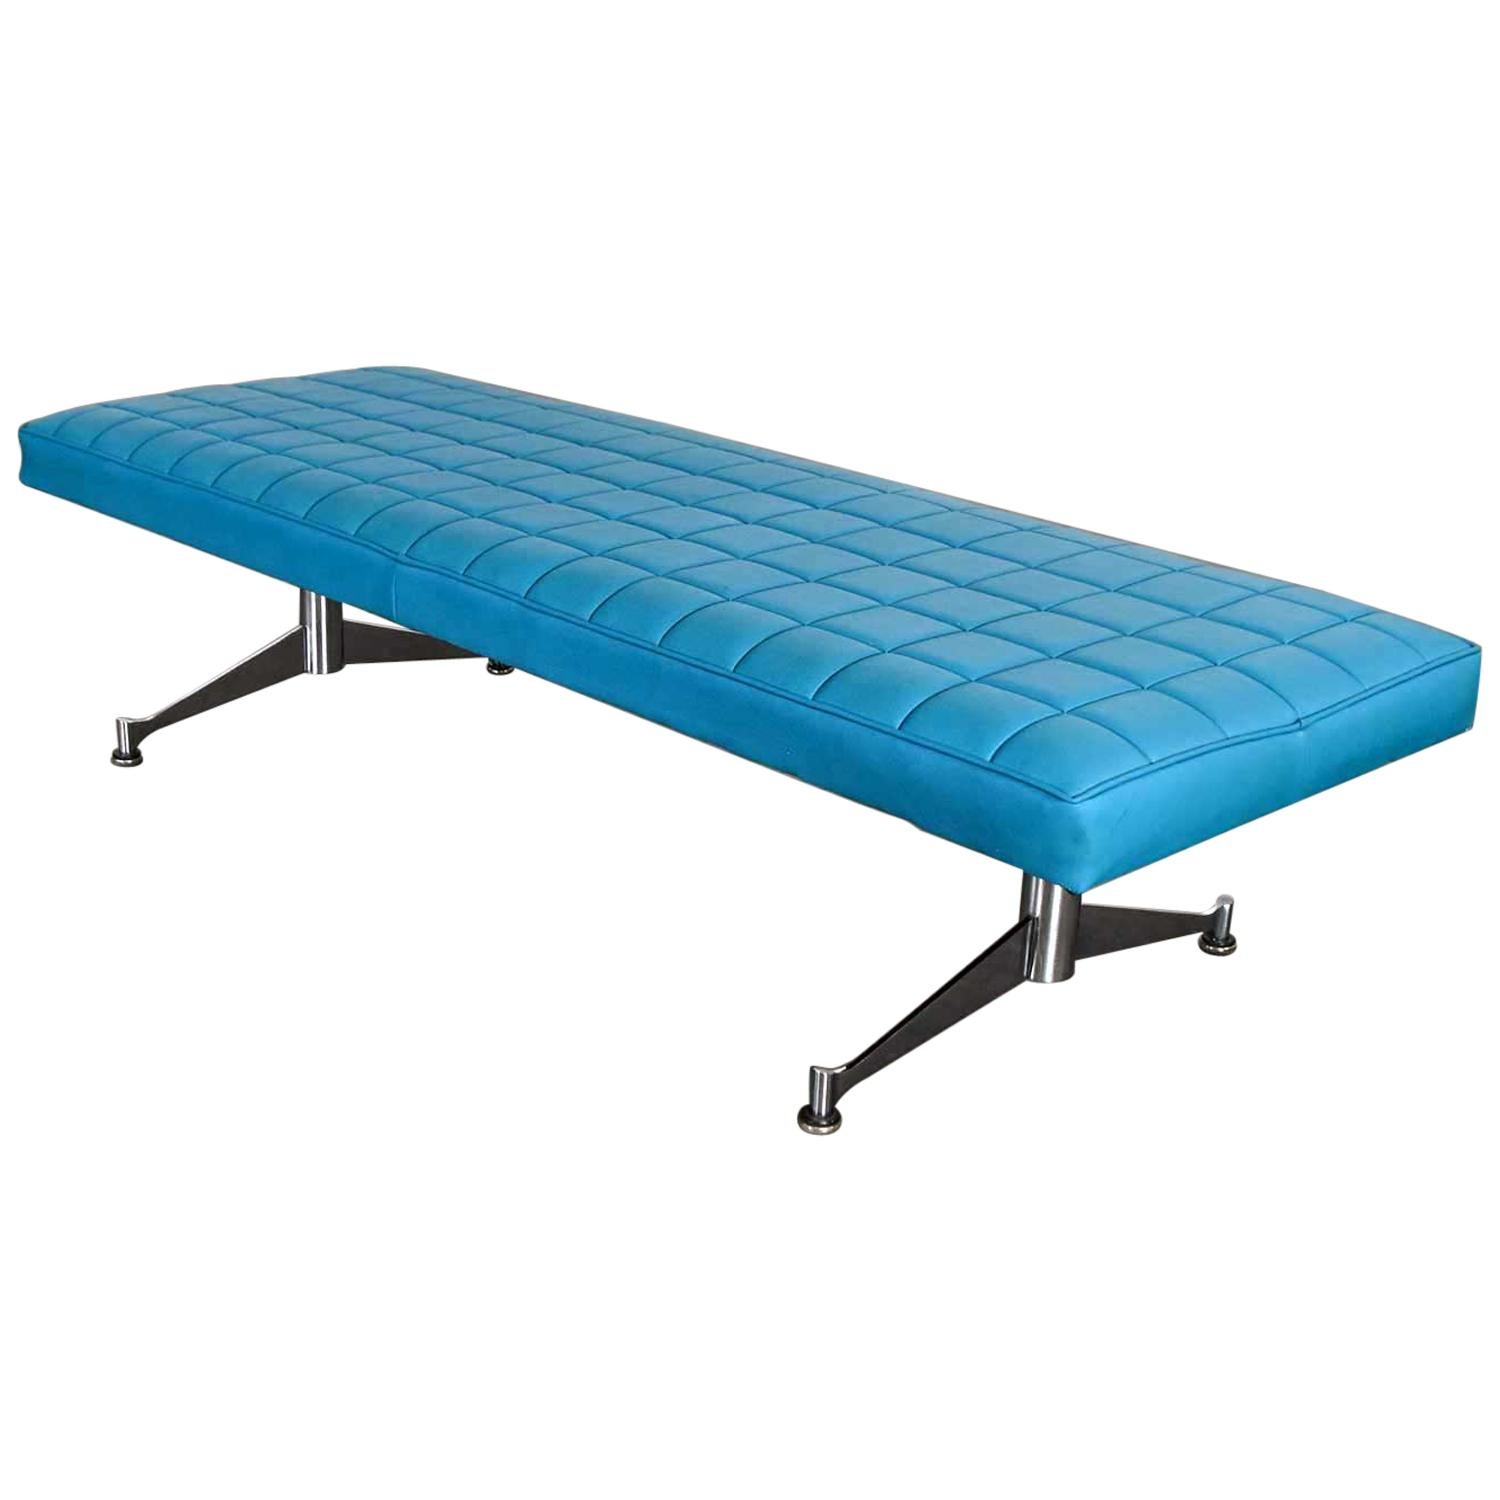 Madison Furn. Vinyl Faux Leather Turquoise Chrome Bench Daybed Style A. Umanoff For Sale